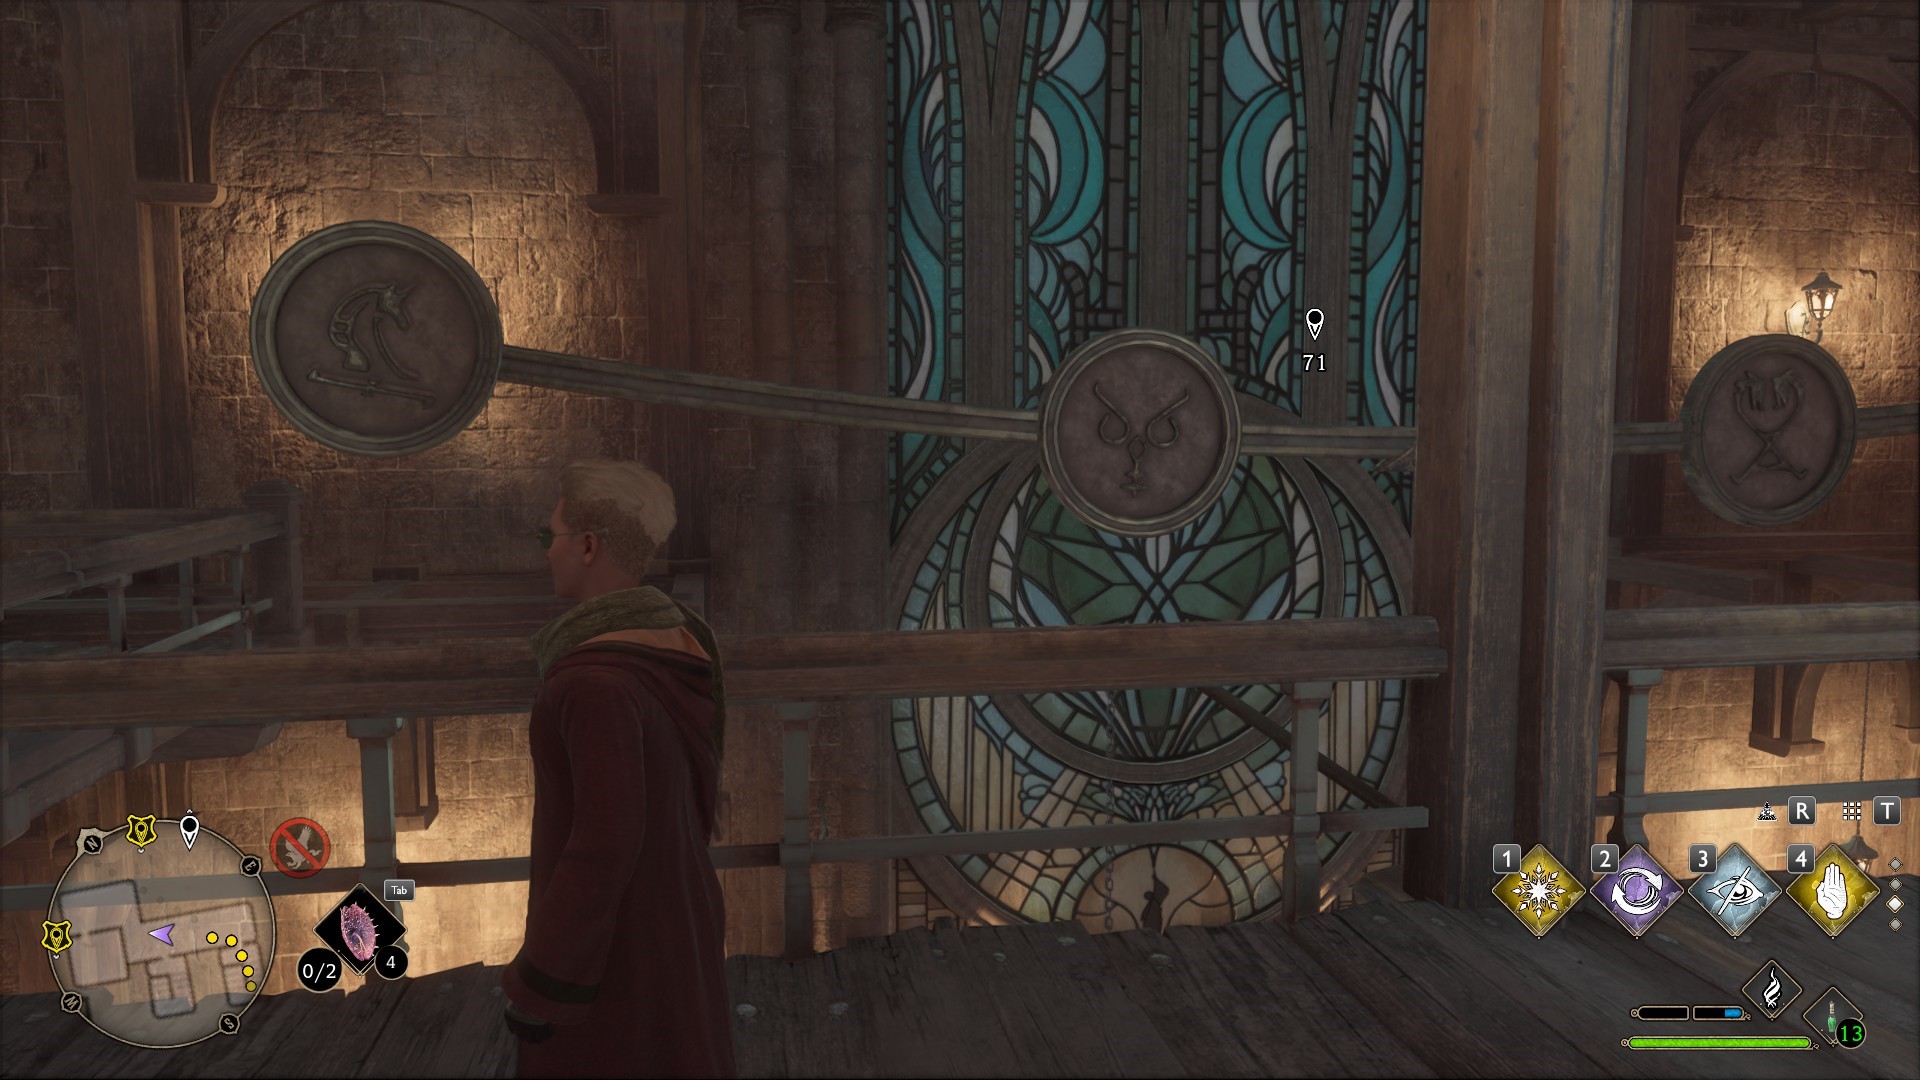 Hogwarts Legacy Clock Tower puzzle - symbols for the doors